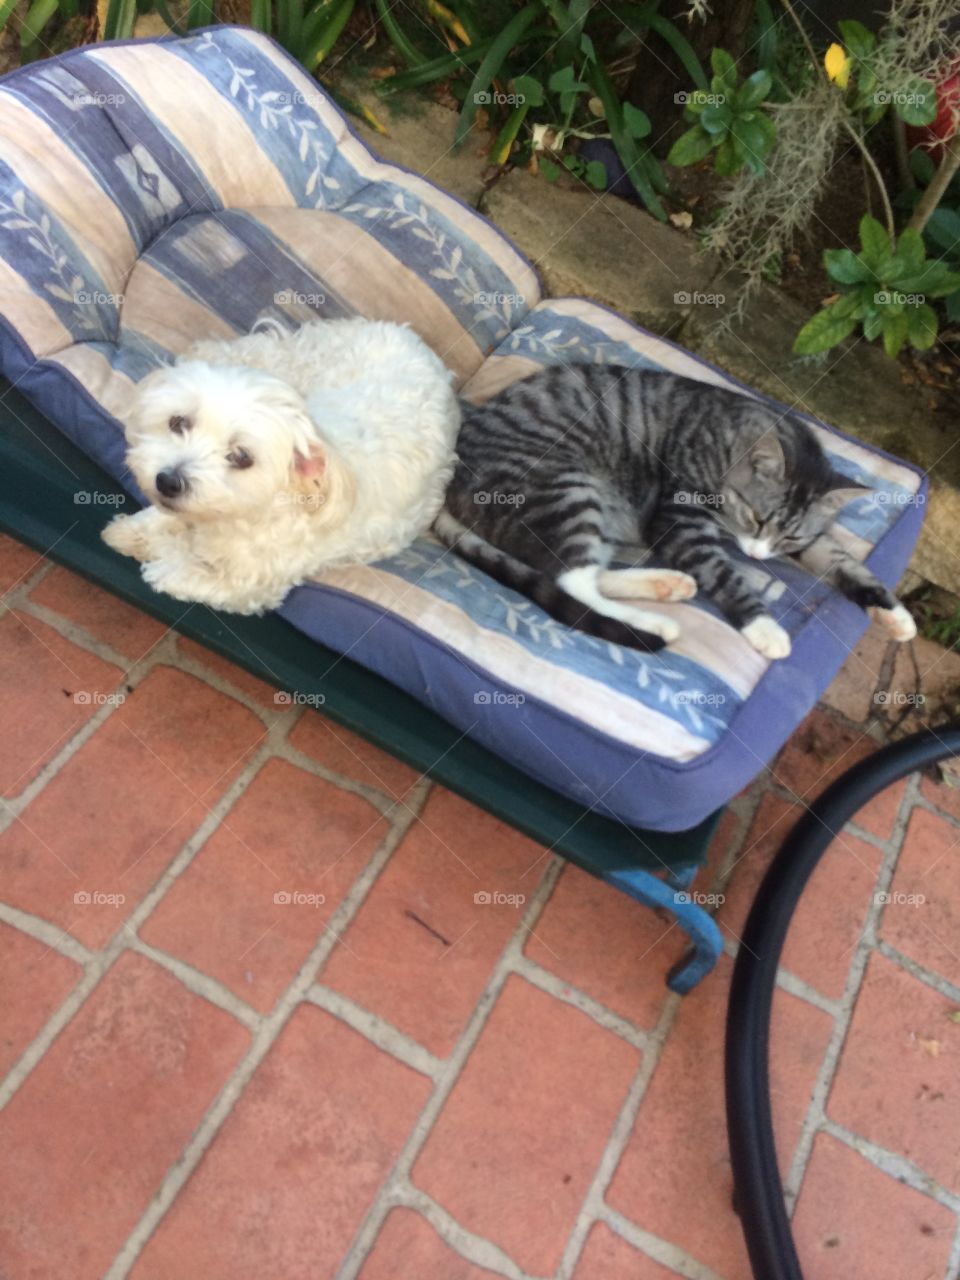 Cat and dog share a nap